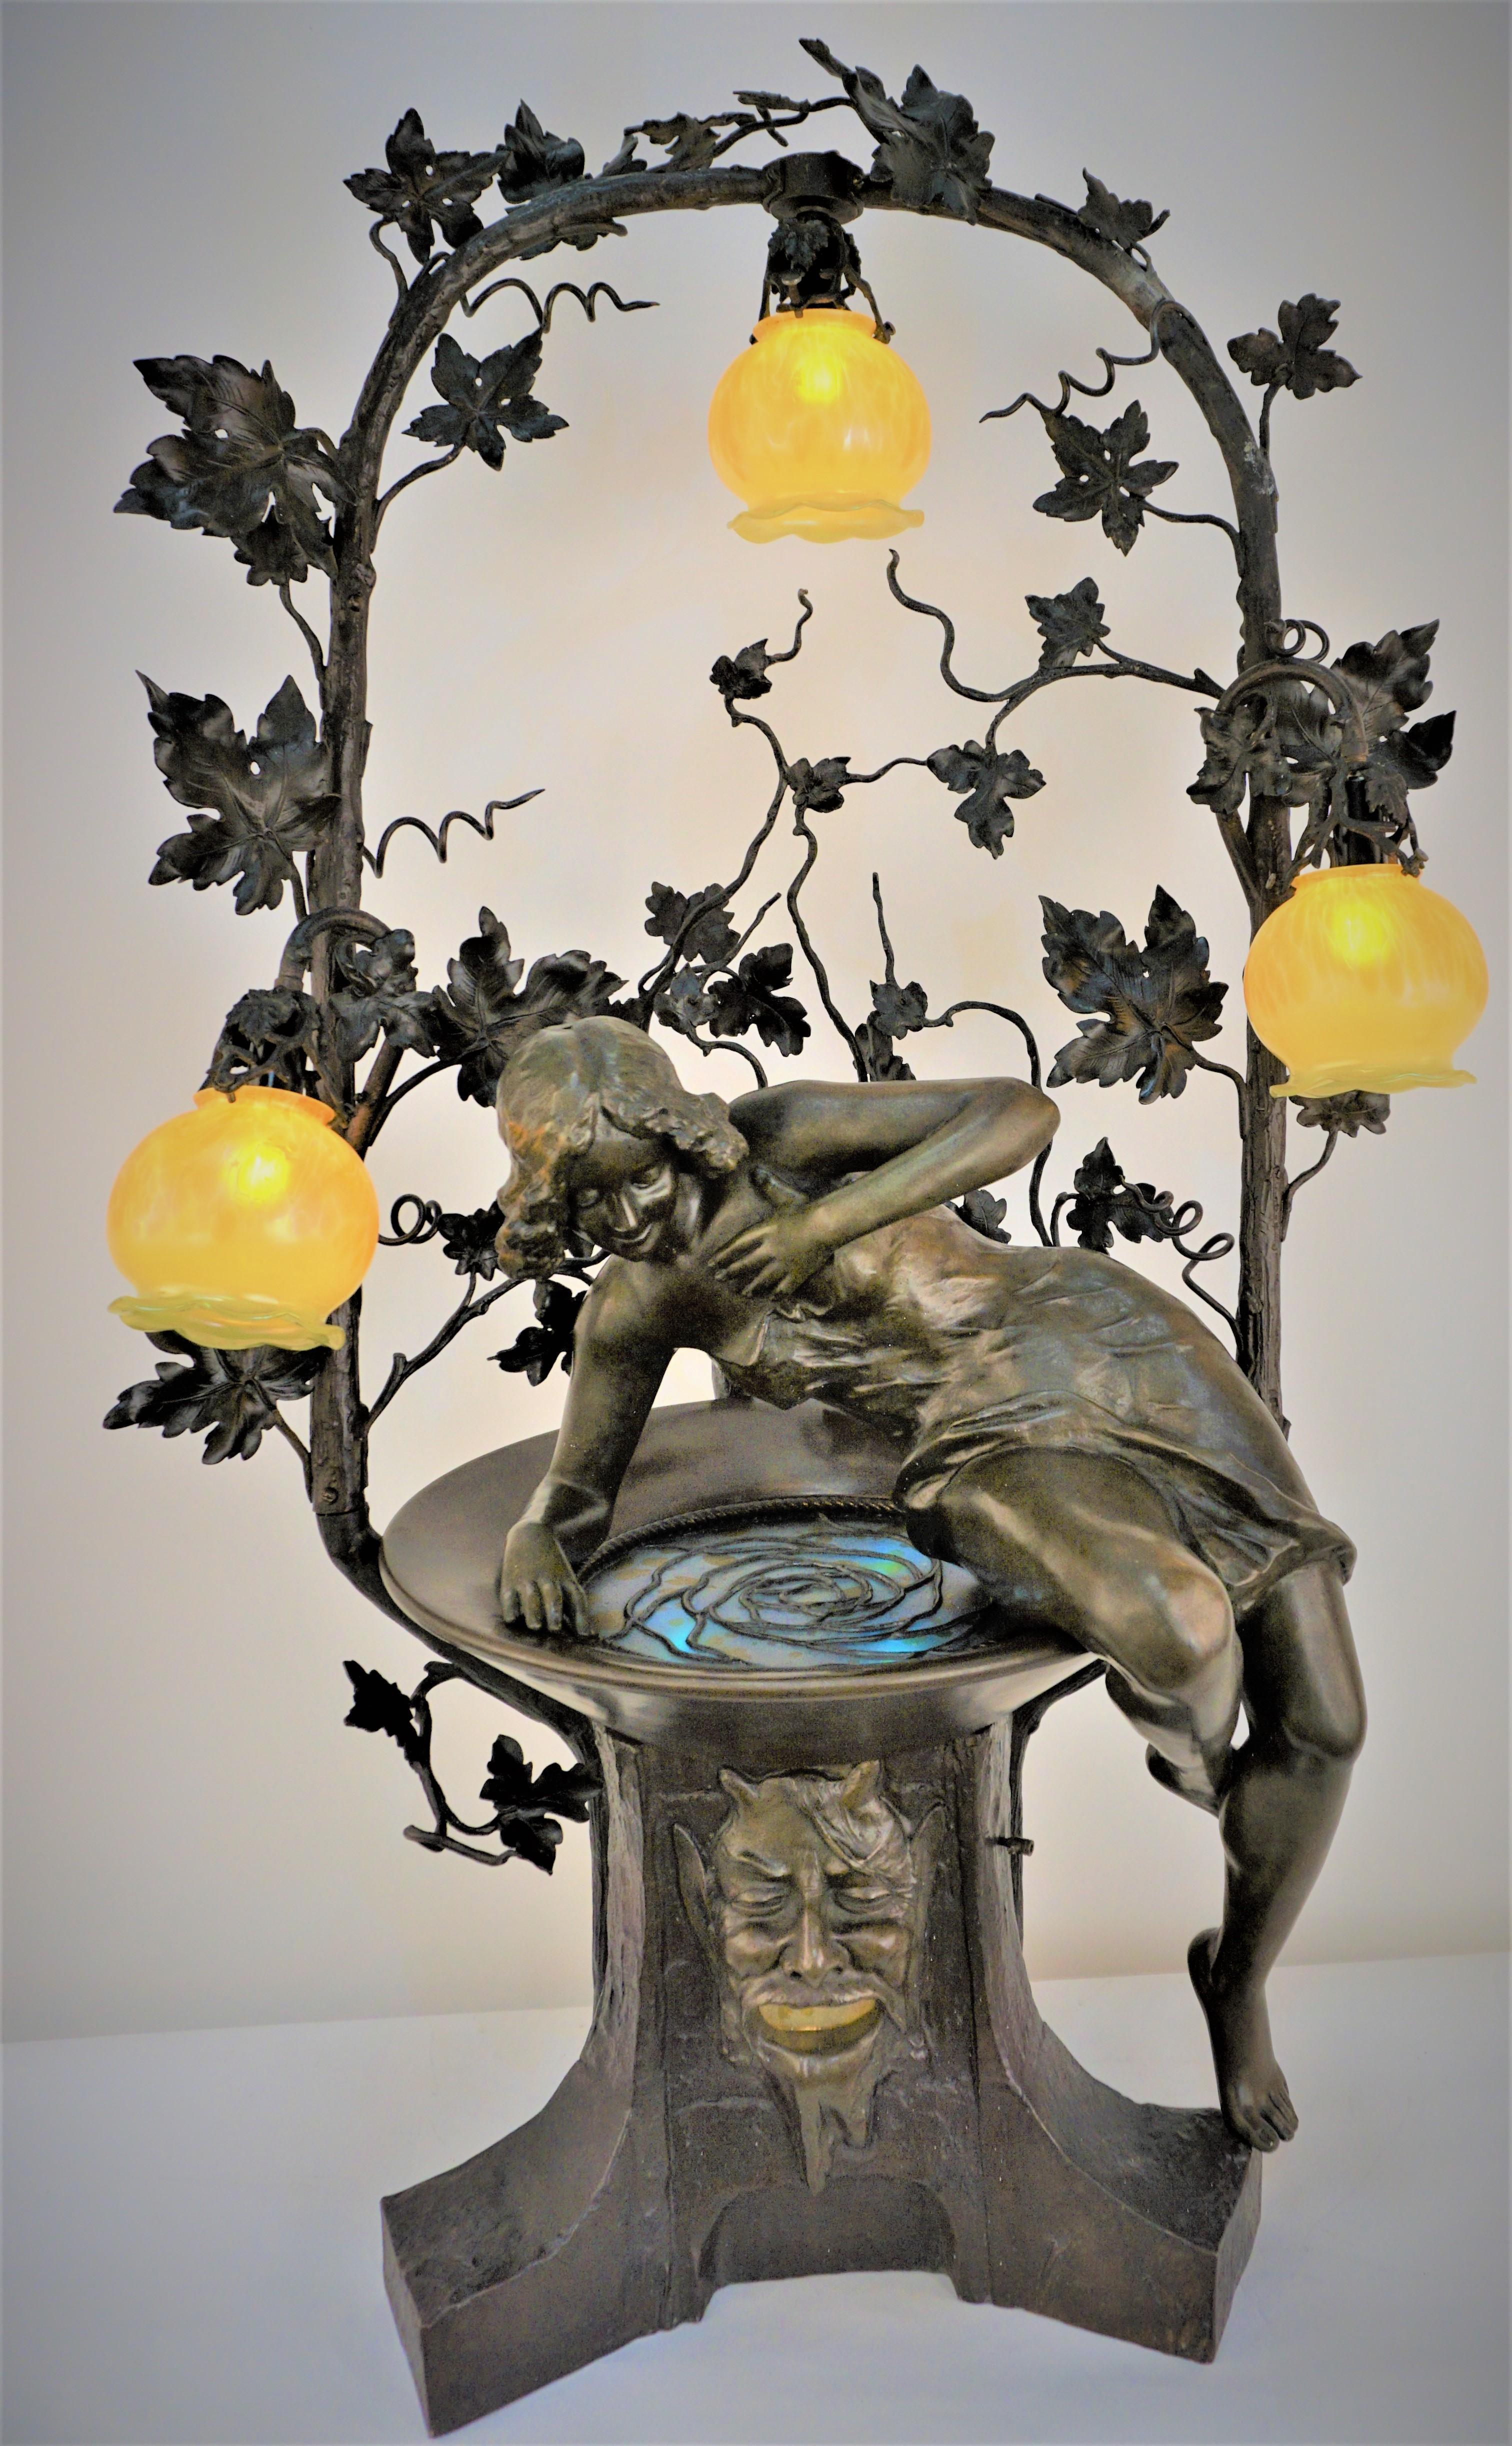 Stunning large art nouveau bronze water fountain Art glass table lamp.
She is looking at her image in the water (art glass with light under it).
base has fan face with mouth open and light reflect through art glass.